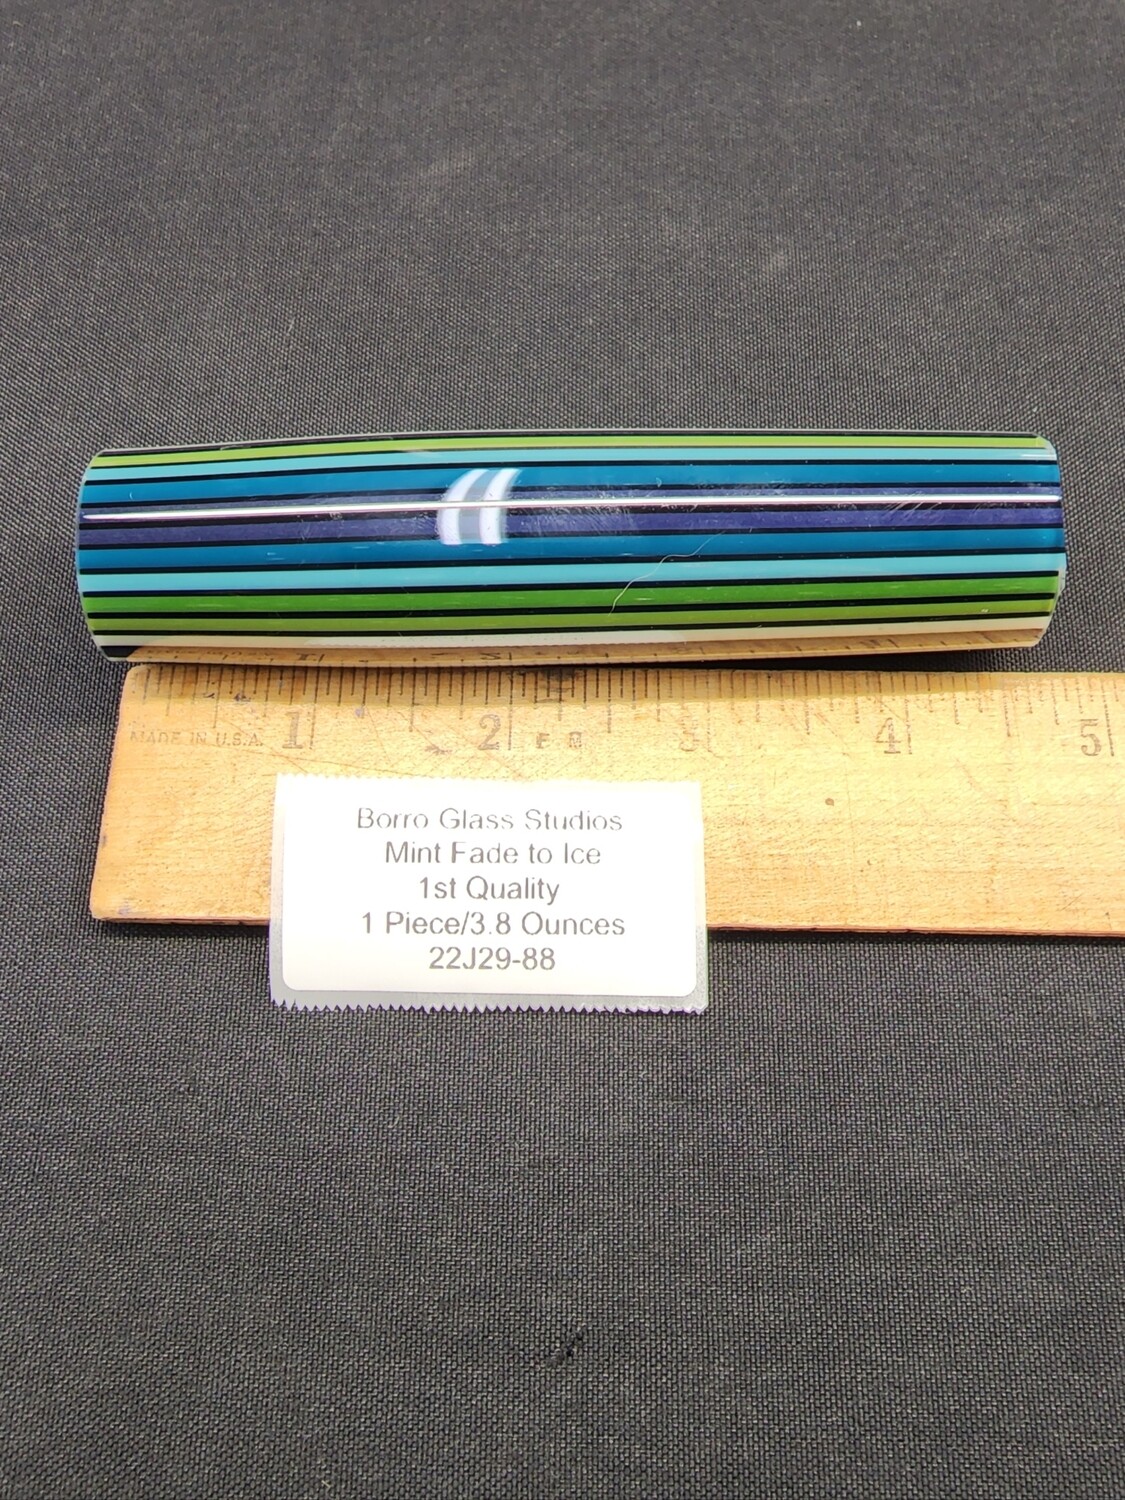 Mint Fade to Ice Boro Vac Stacked Line Tubing - 1st Quality - 3.8 Ounces